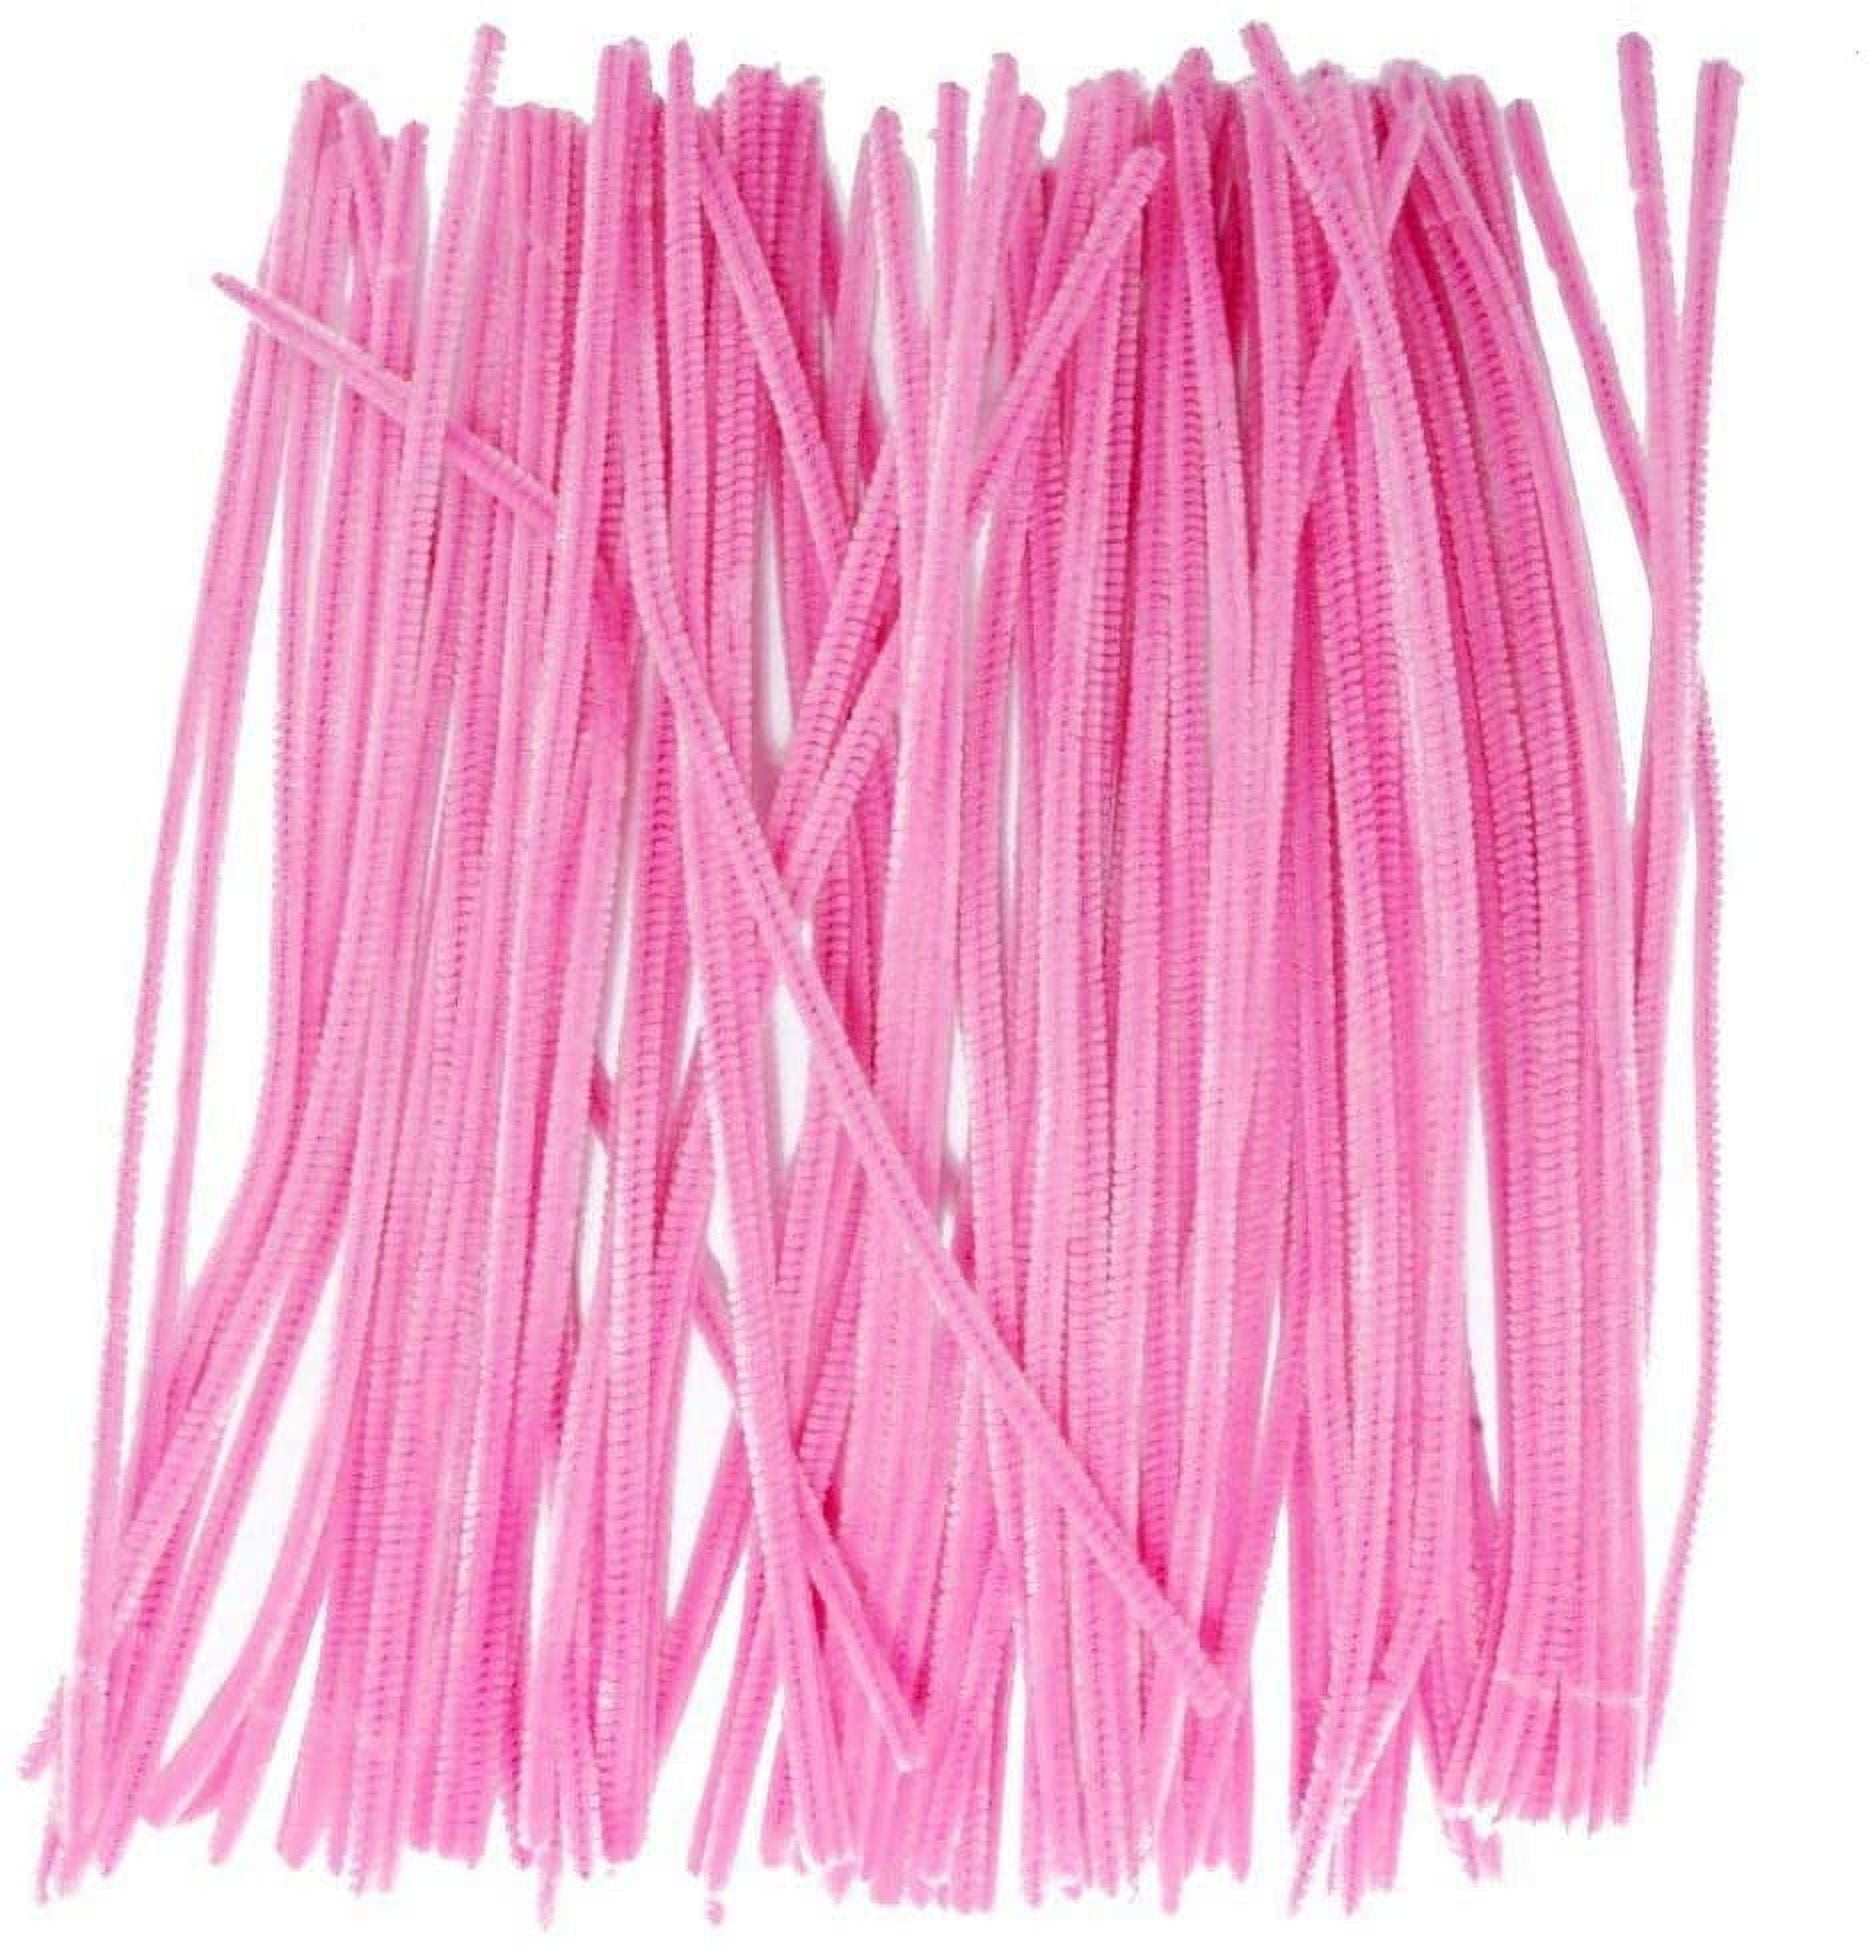 ASIAN HOBBY CRAFTS Pipe Cleaner 12”: Baby Pink Color : 100pcs